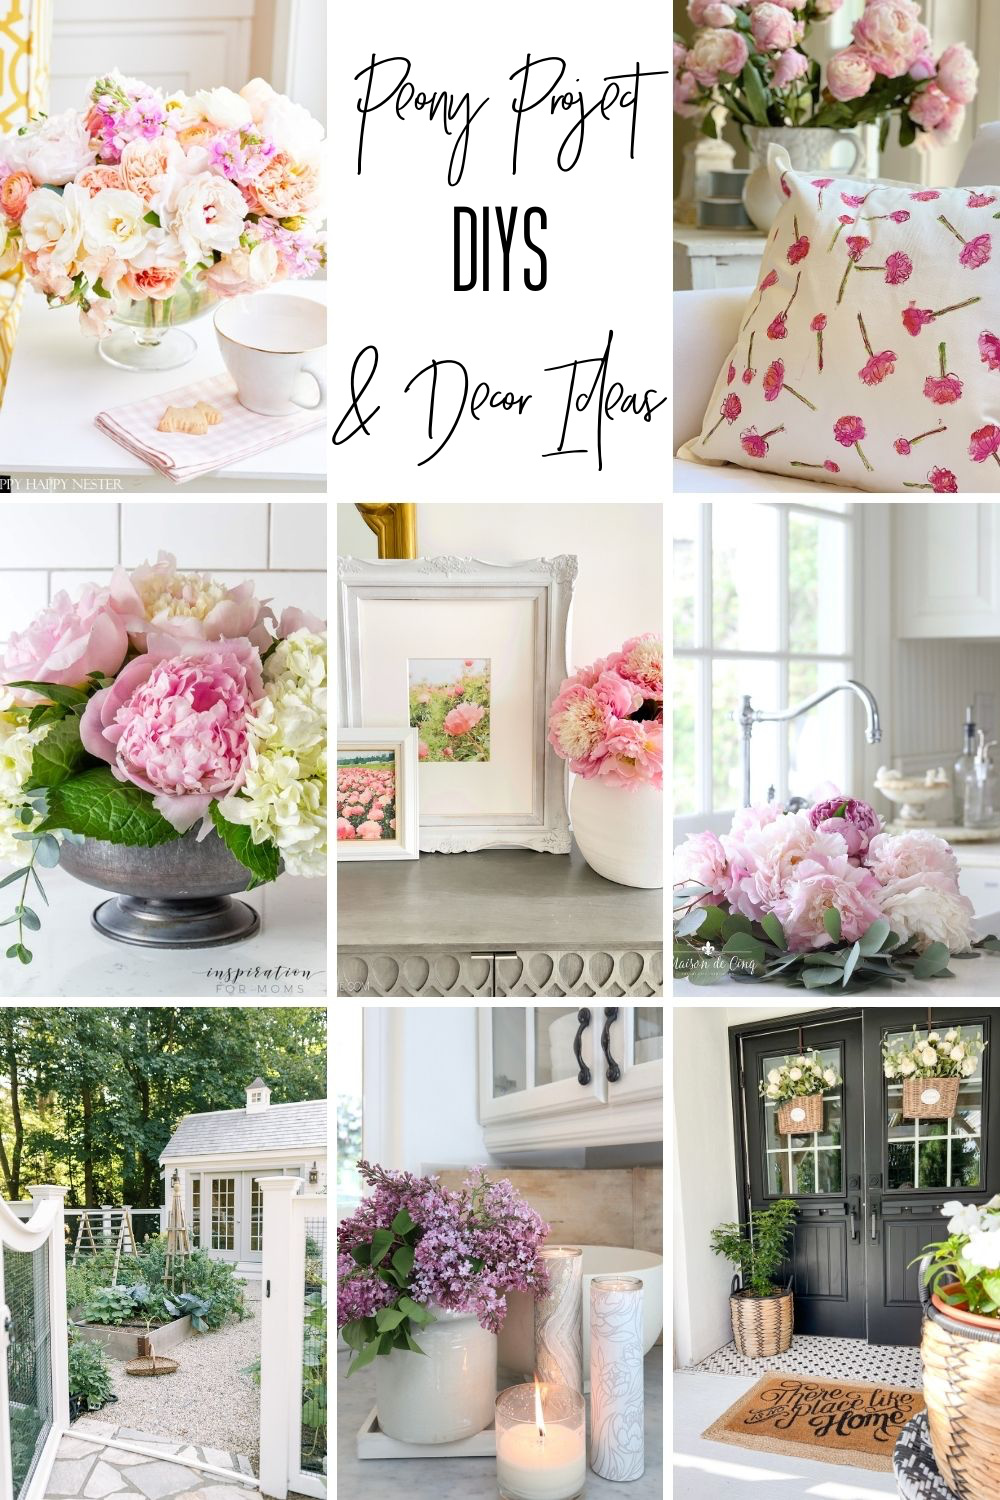 a collage image featuring peony projects and peony decor ideas